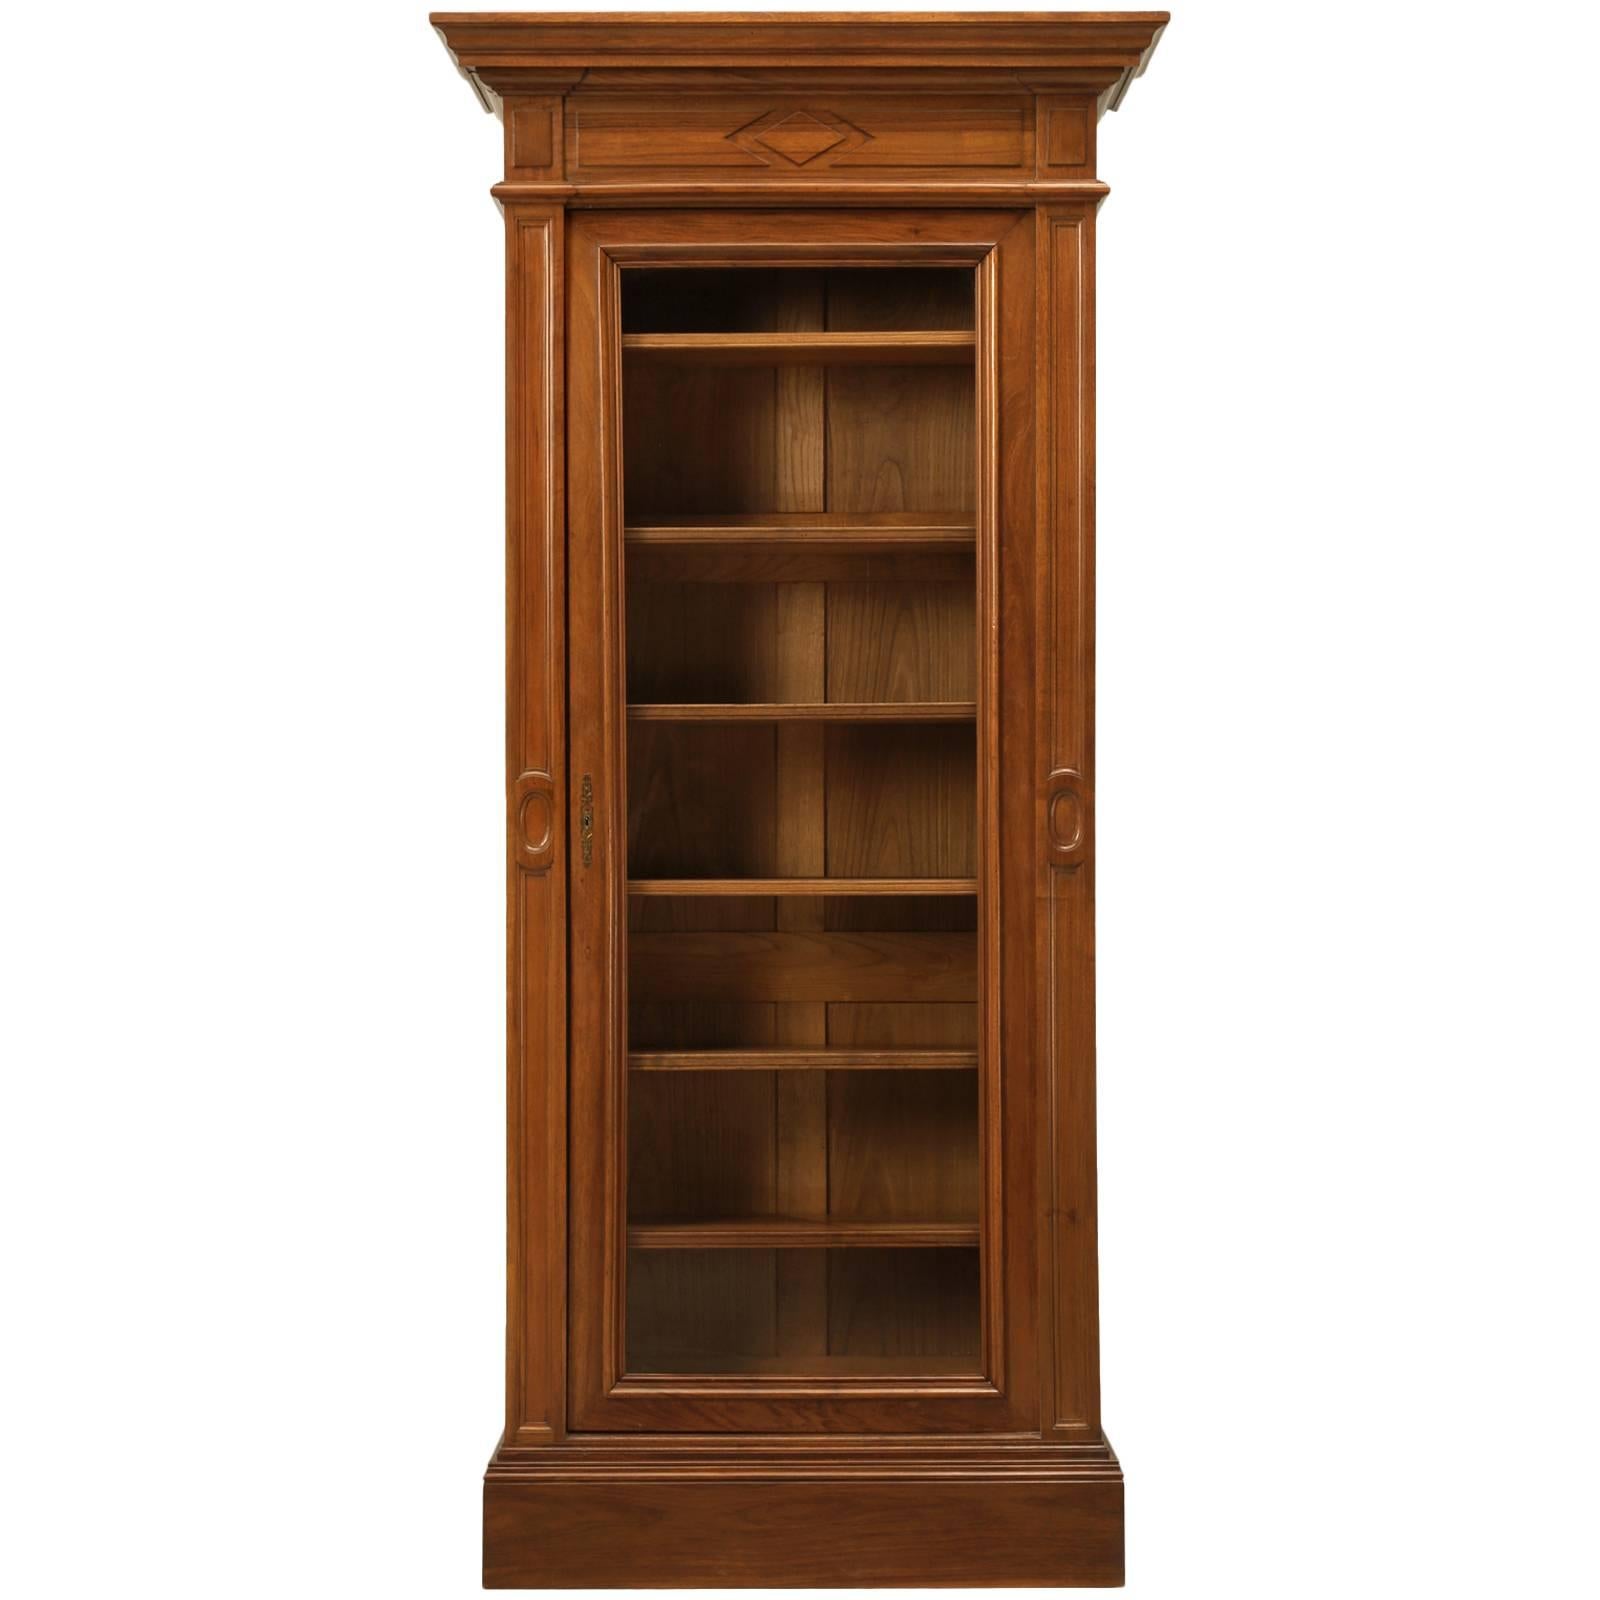 Antique French Bookcase in Solid Walnut